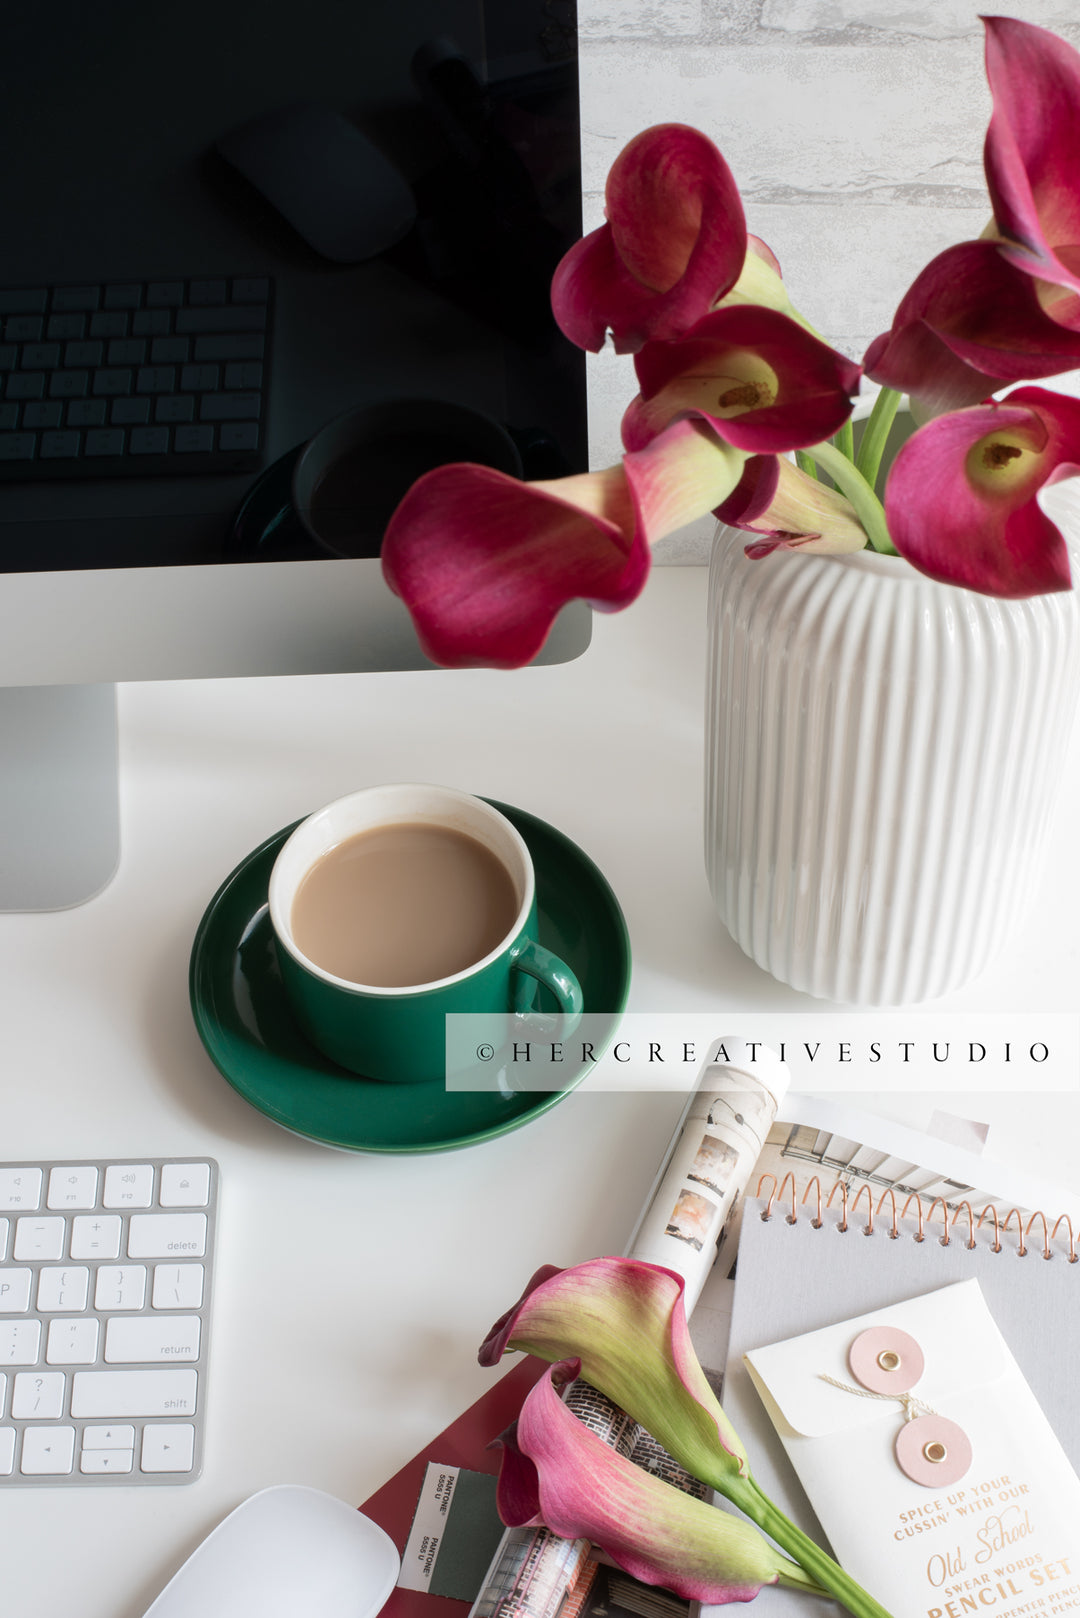 Calla Lilly & Coffee on Workspace. Stock Photo.